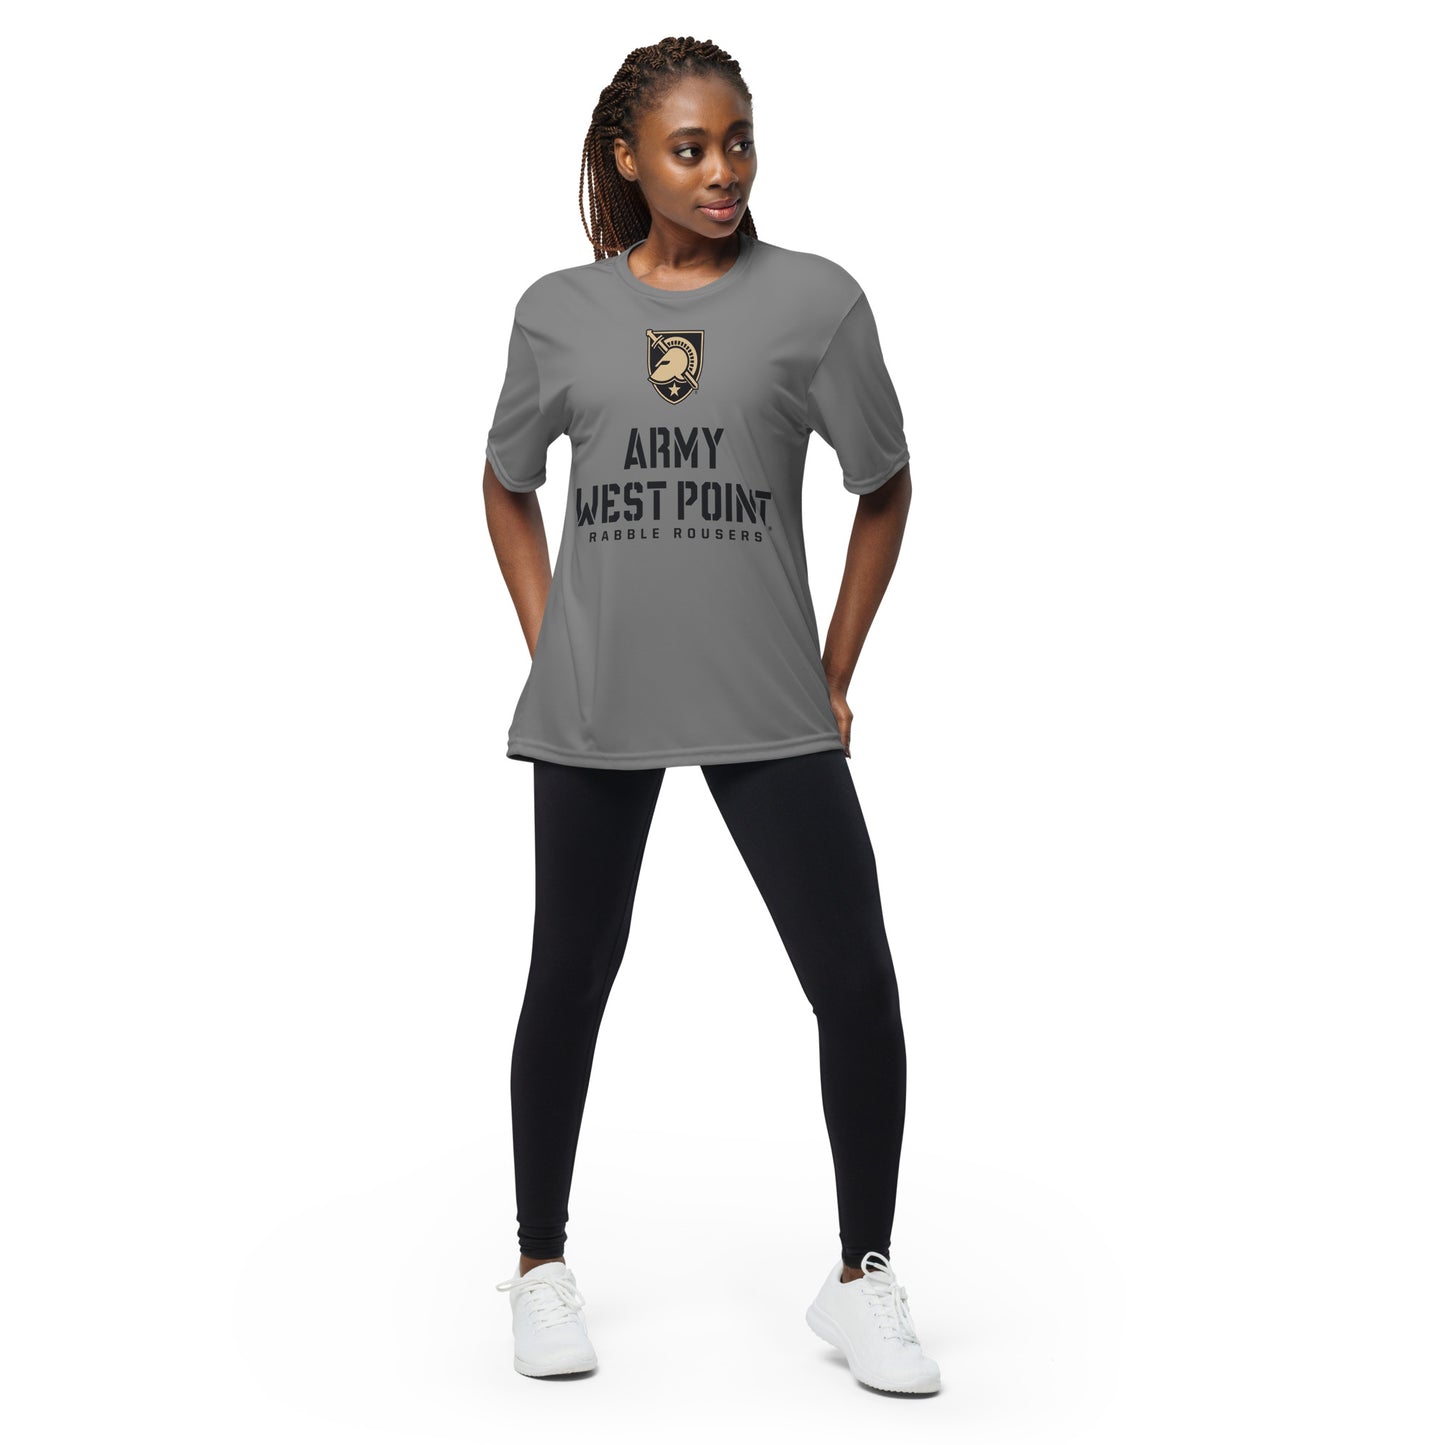 Army West Point Rabble Rousers Unisex performance crew neck t-shirt